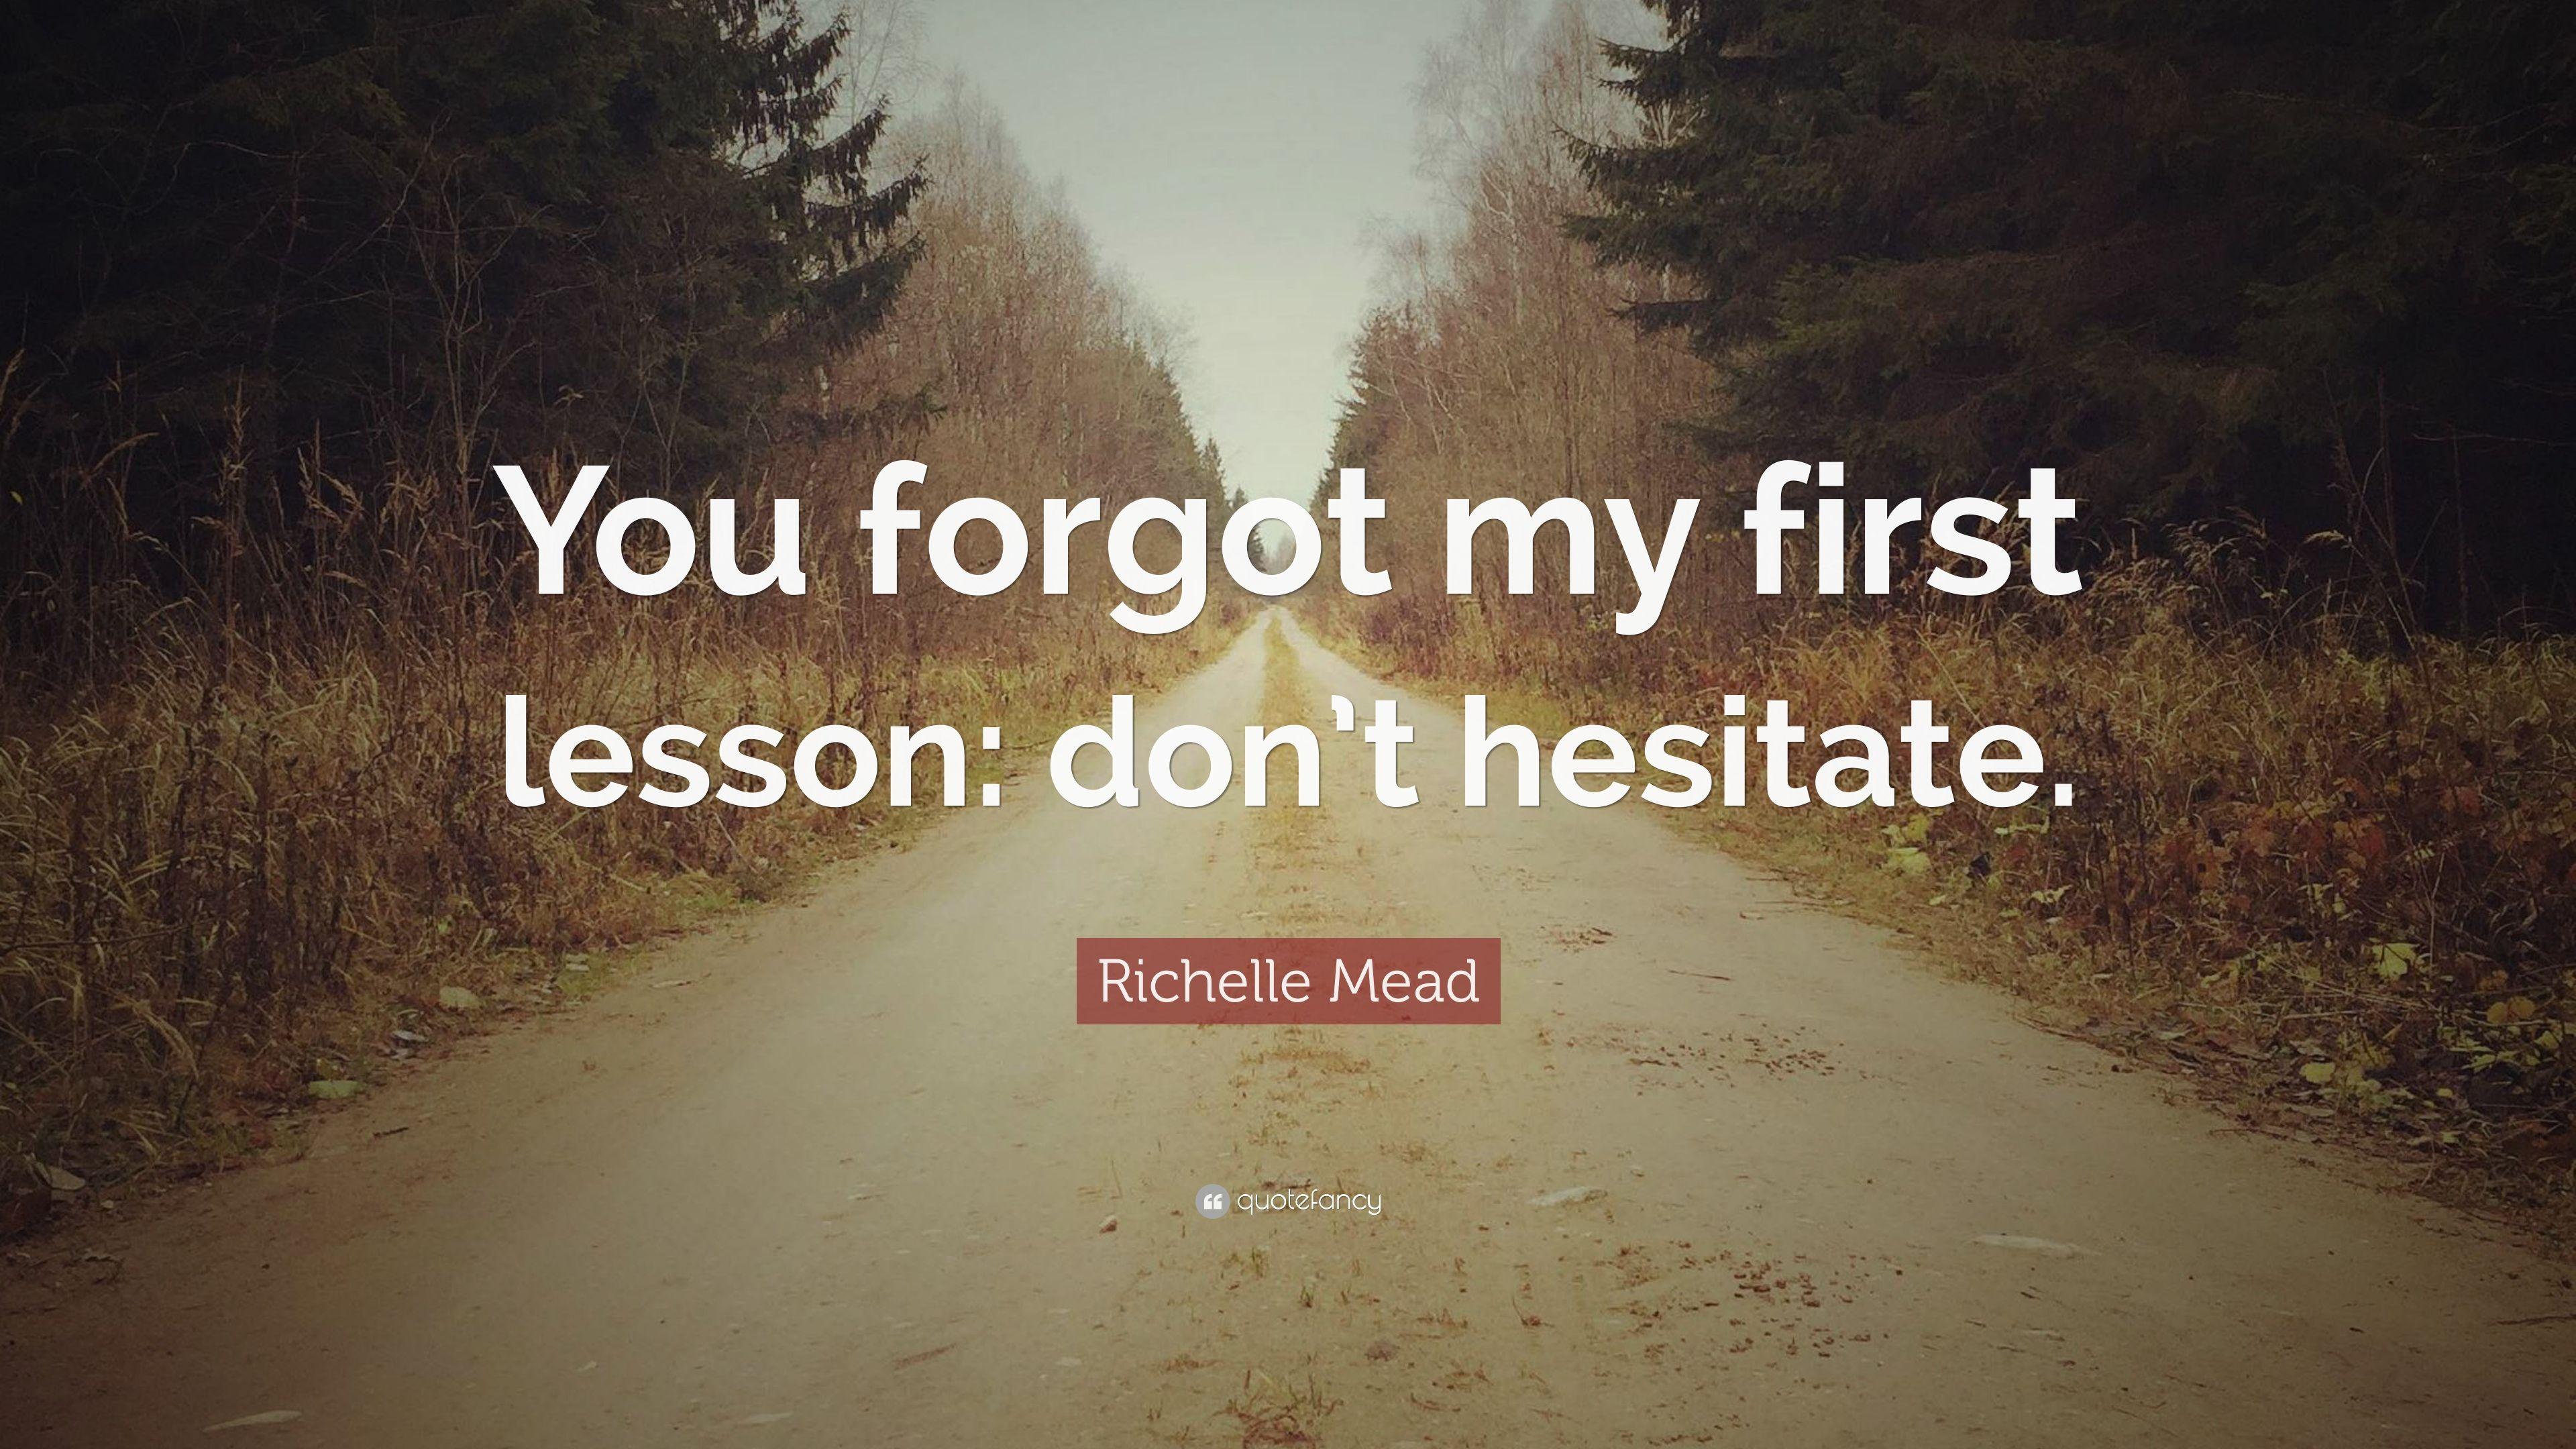 Richelle Mead Quote: “You forgot my first lesson: don't hesitate